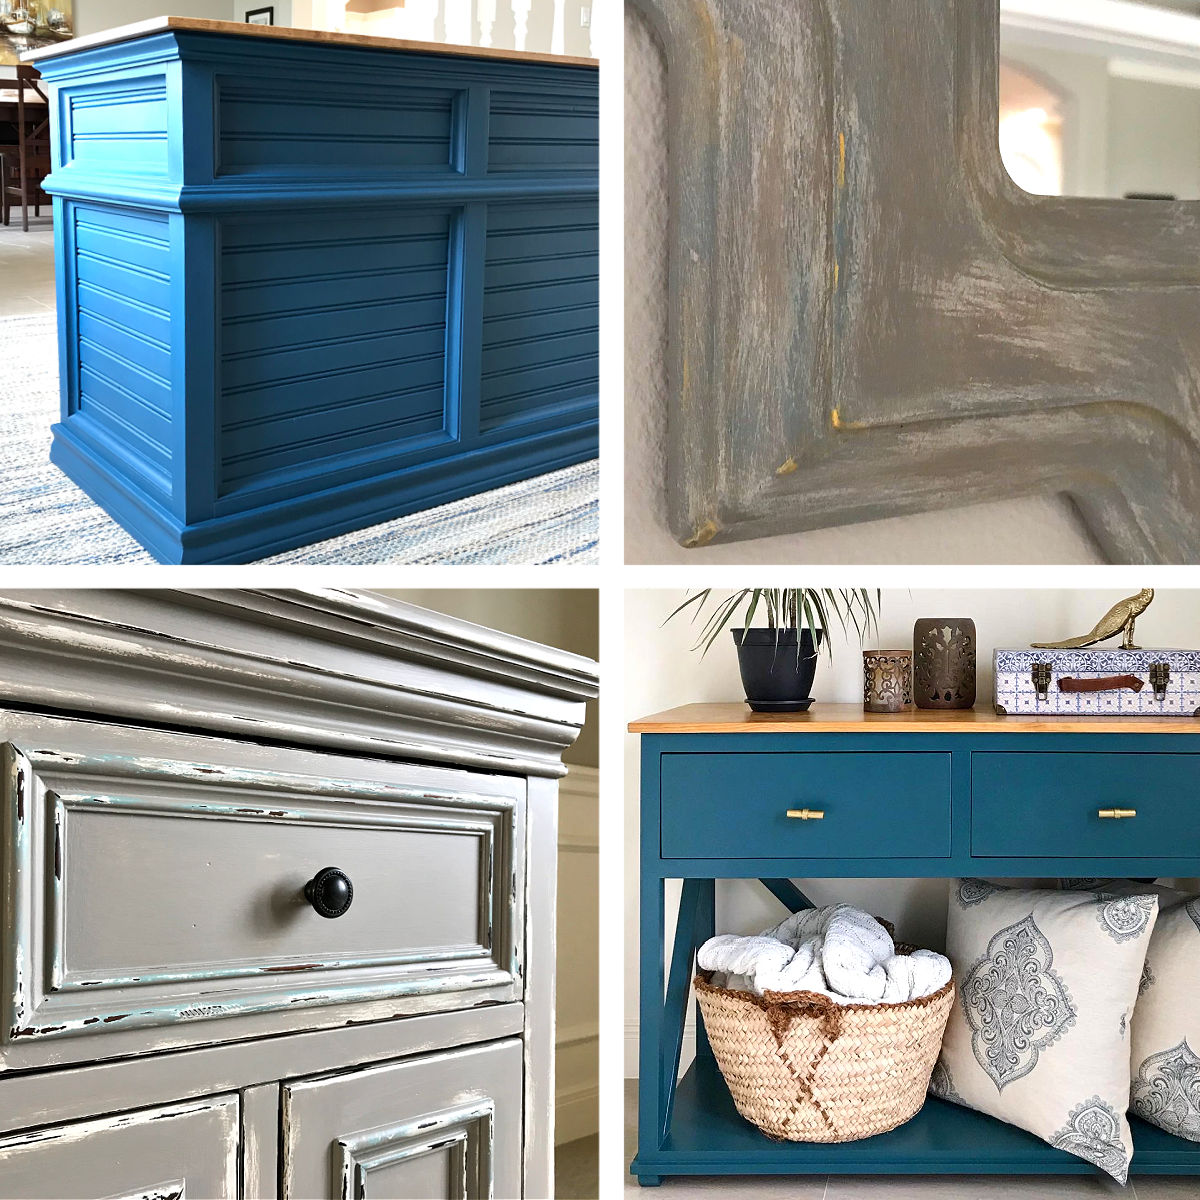 How to Paint Furniture with Chalk Paint - dummies